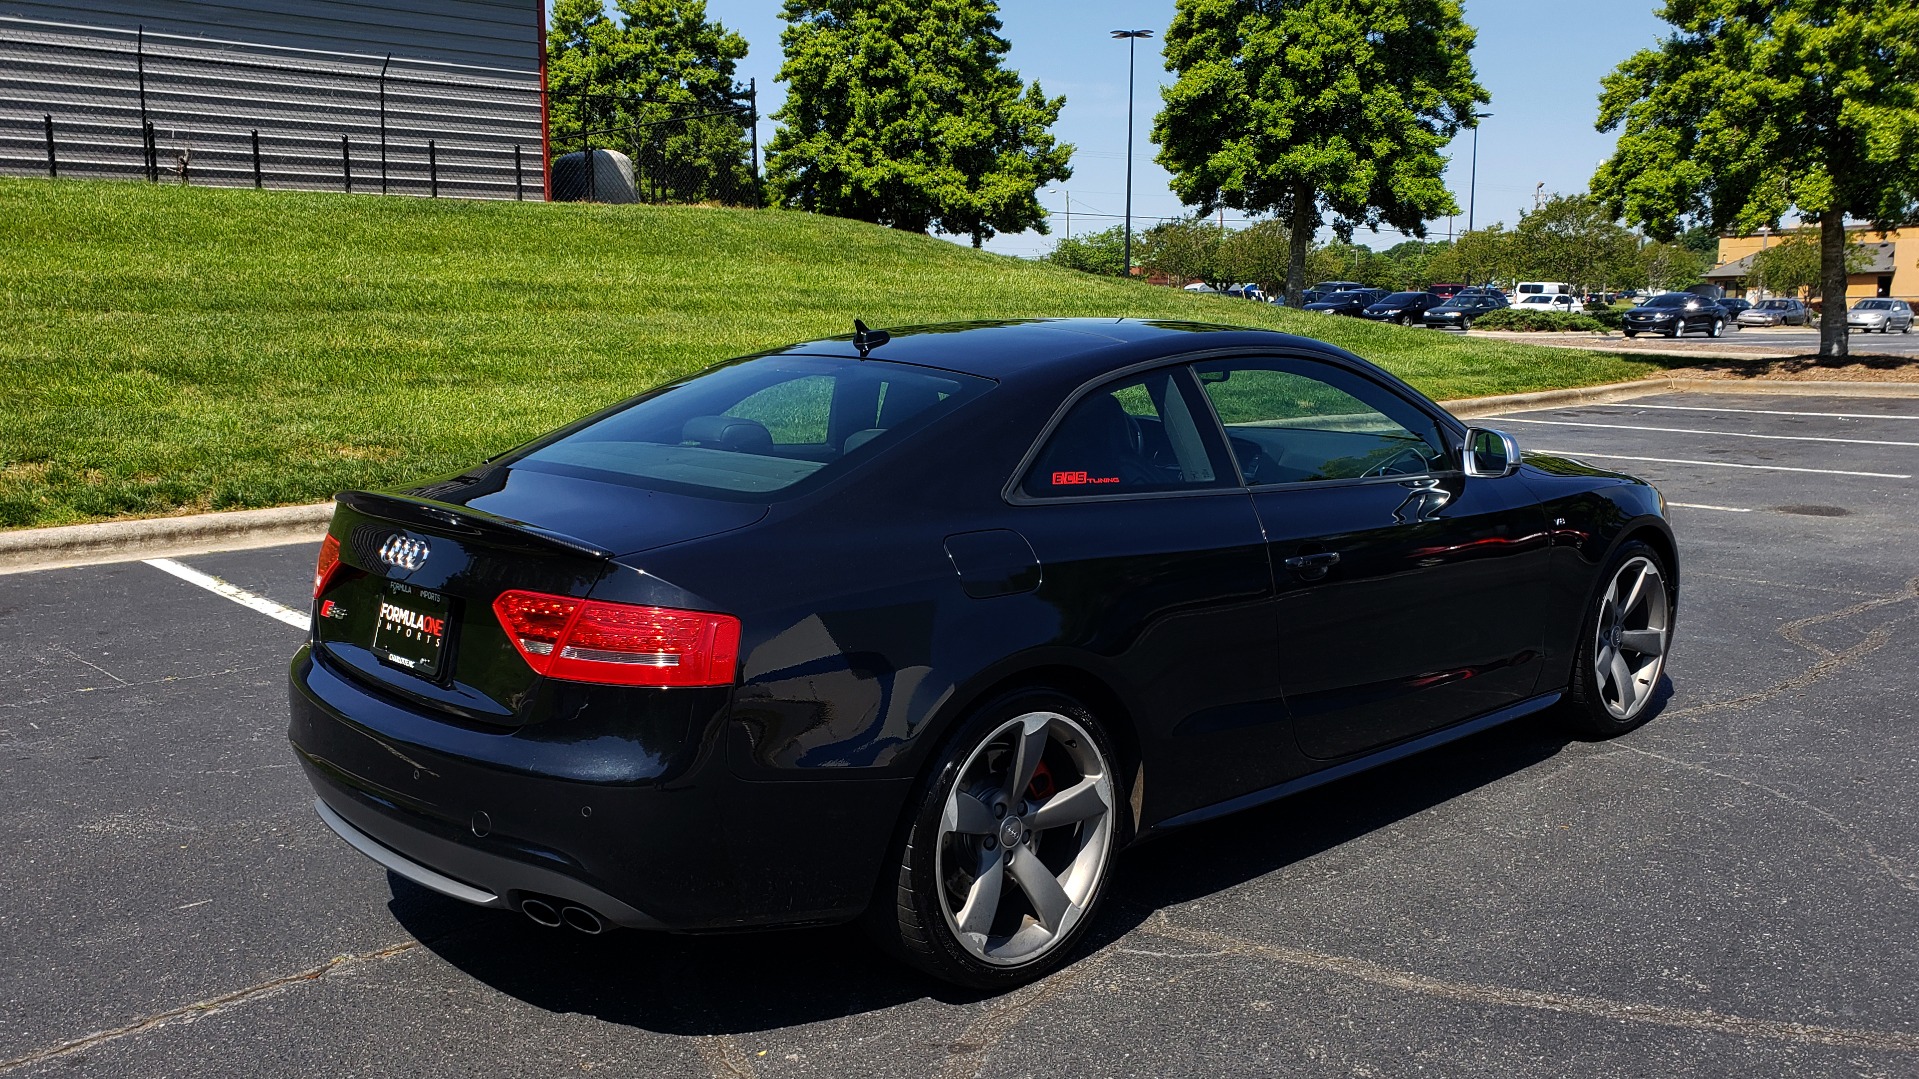 Used 2011 Audi S5 PREMIUM PLUS / AVENGERS COUPE / NAV / SUNROOF / REARVIEW for sale Sold at Formula Imports in Charlotte NC 28227 6